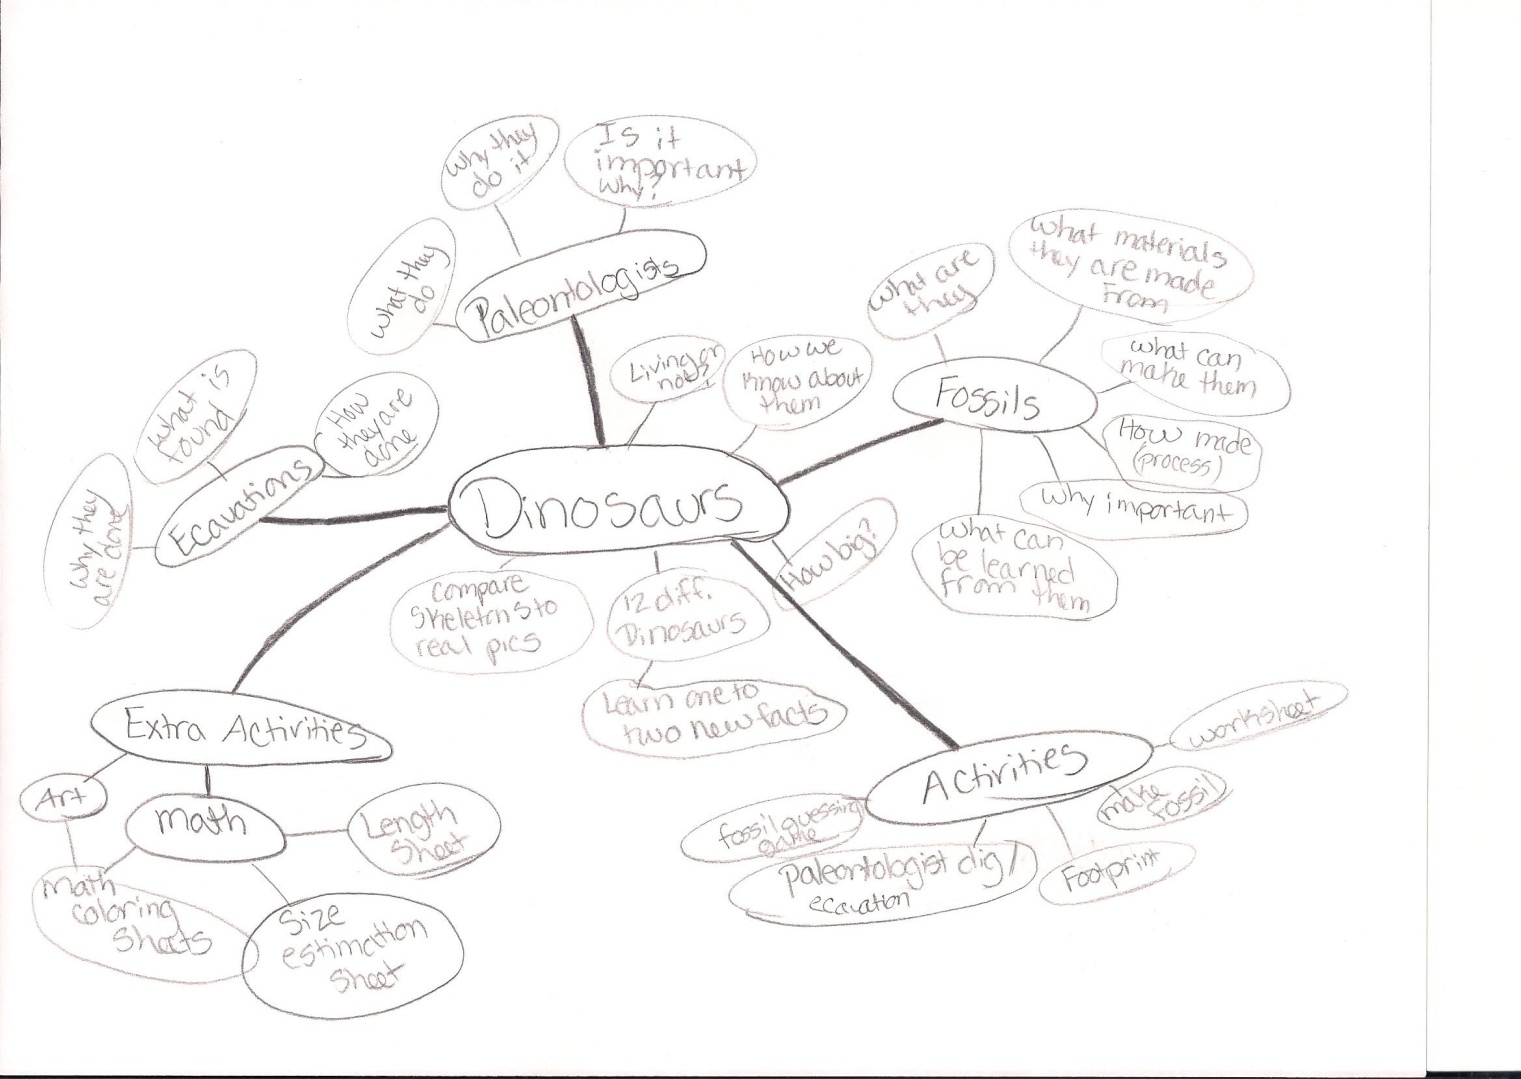 c:\users\brian\pictures\scanned documents\dino unit\concept map 001.jpg